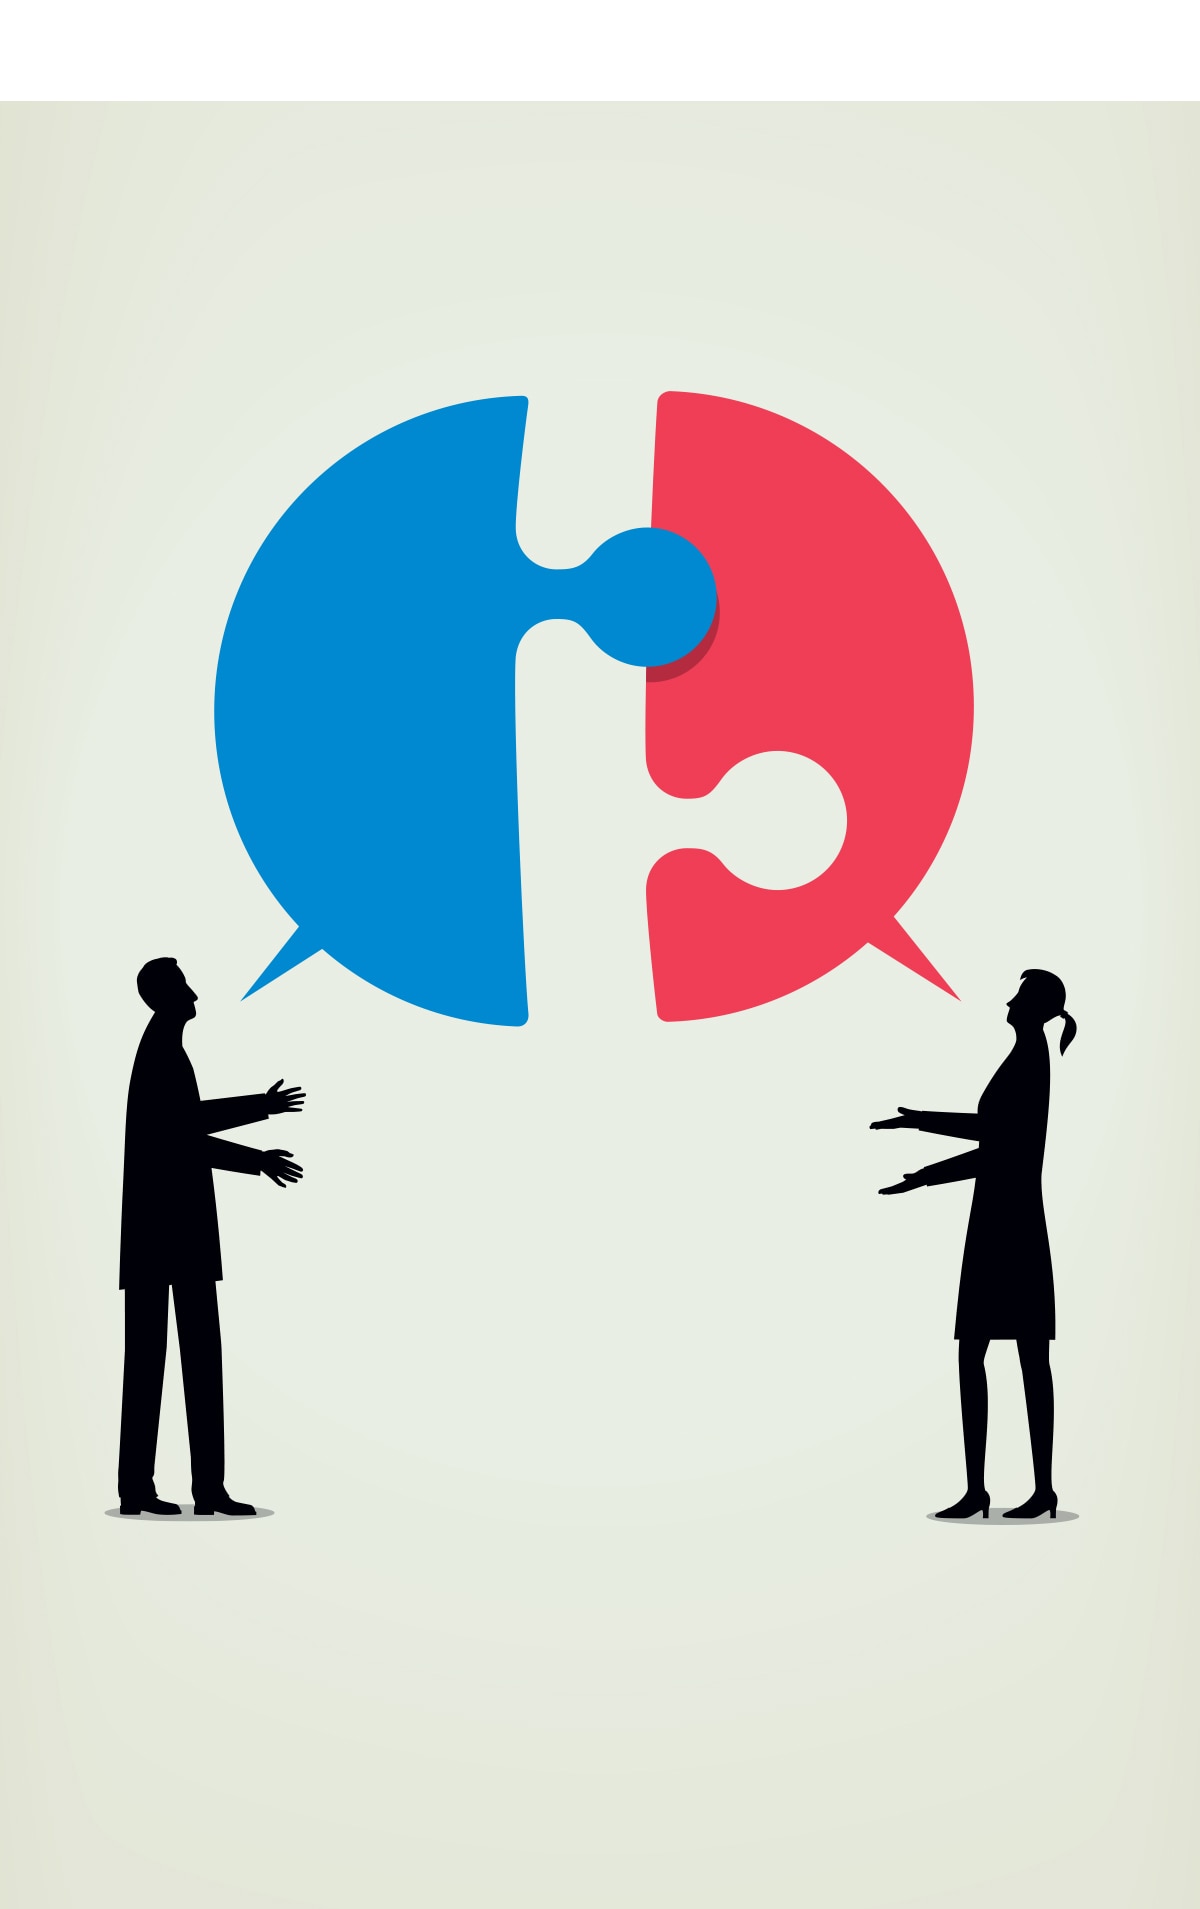 Man speaking to a woman with blue and red word bubbles in the shape of puzzle pieces